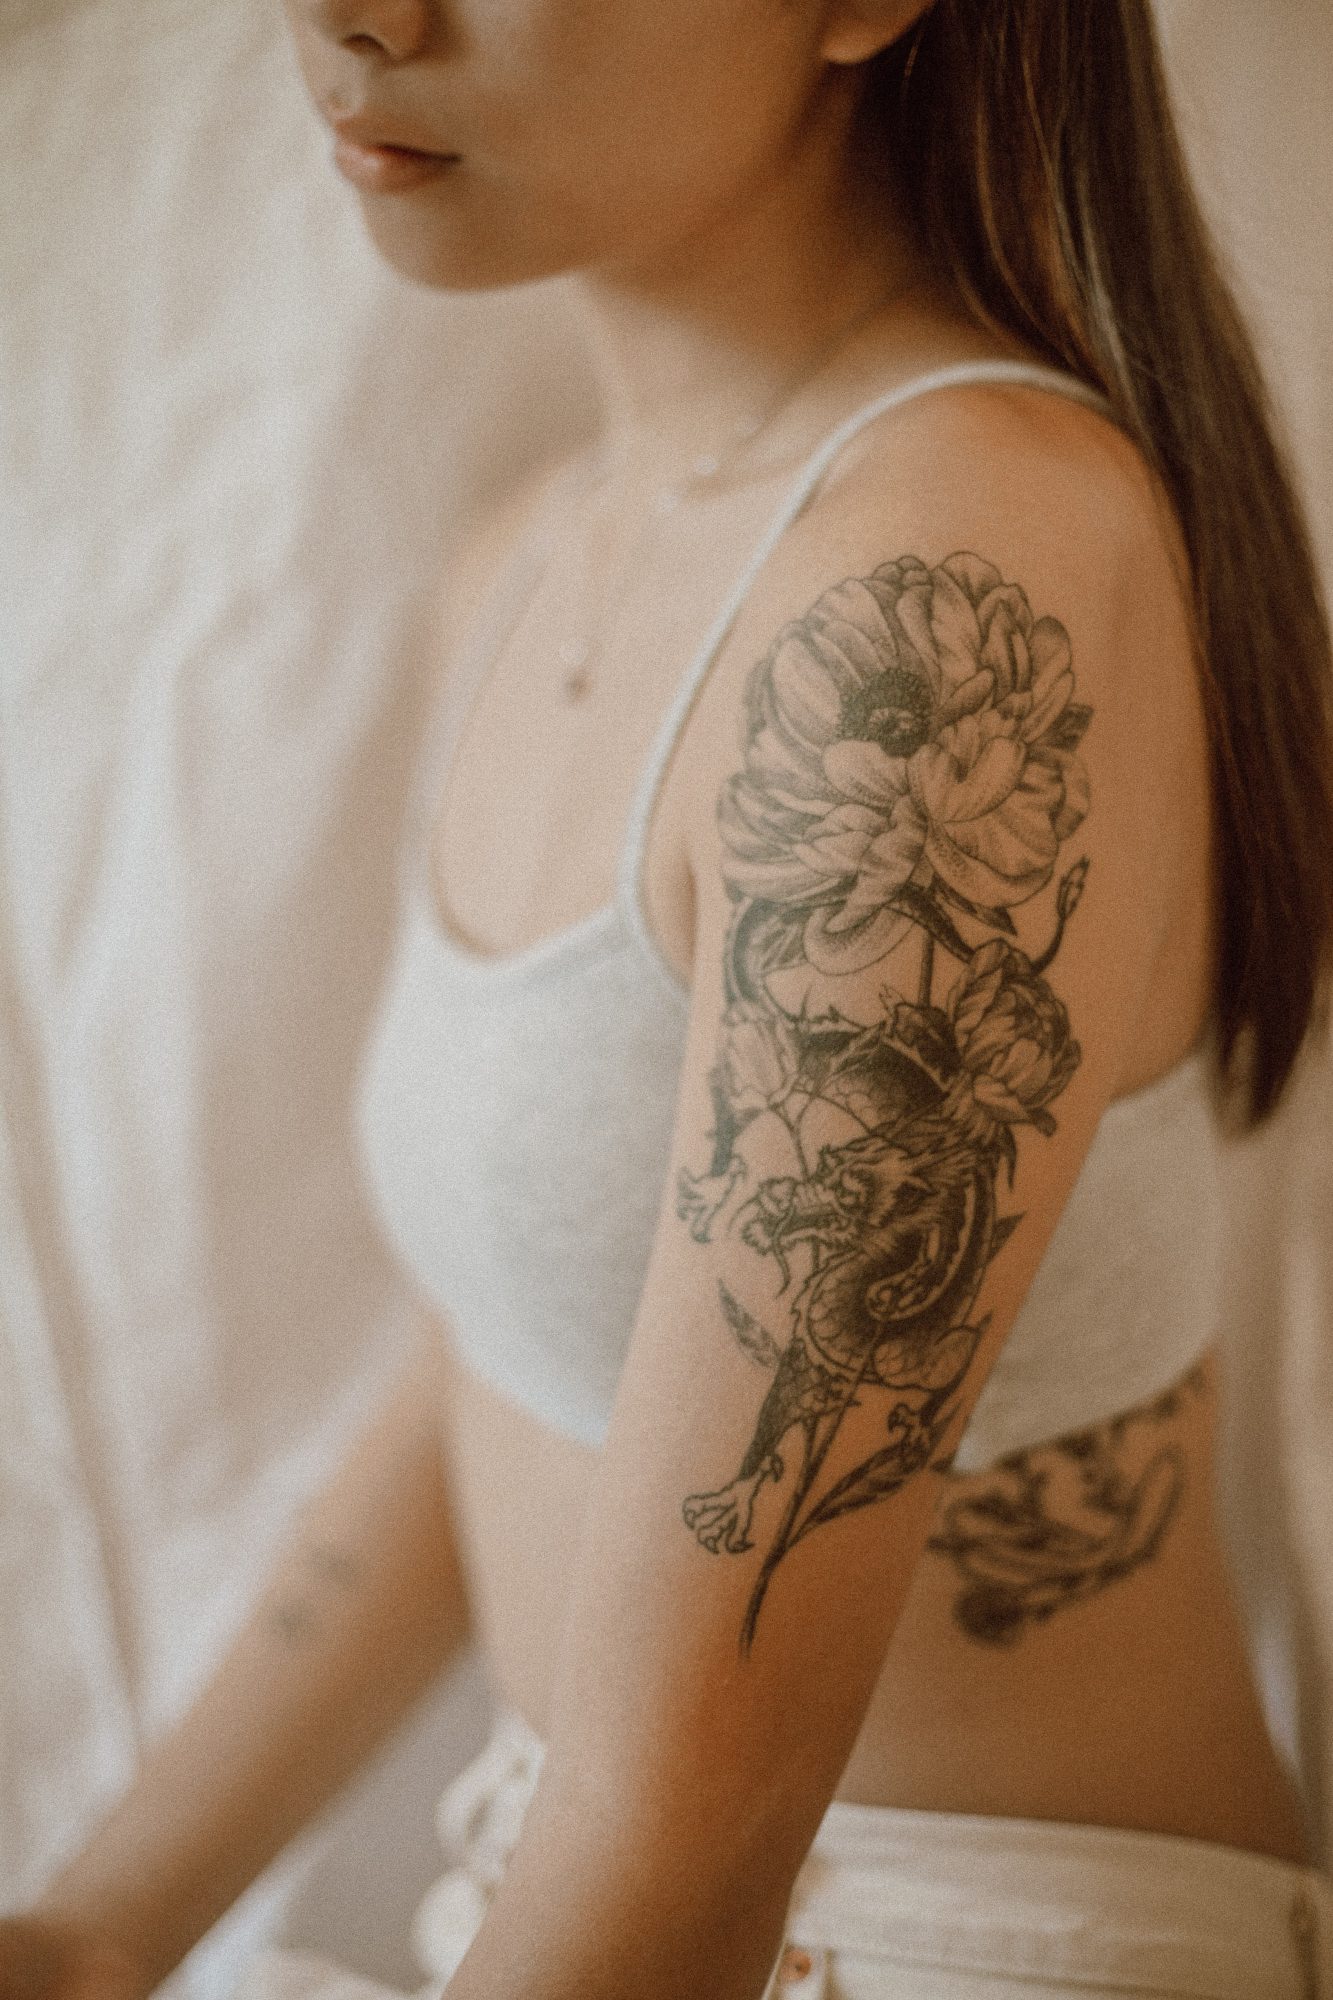 How to Take Care of a New Tattoo: Tattoo Aftercare InstructionsHelloGiggles